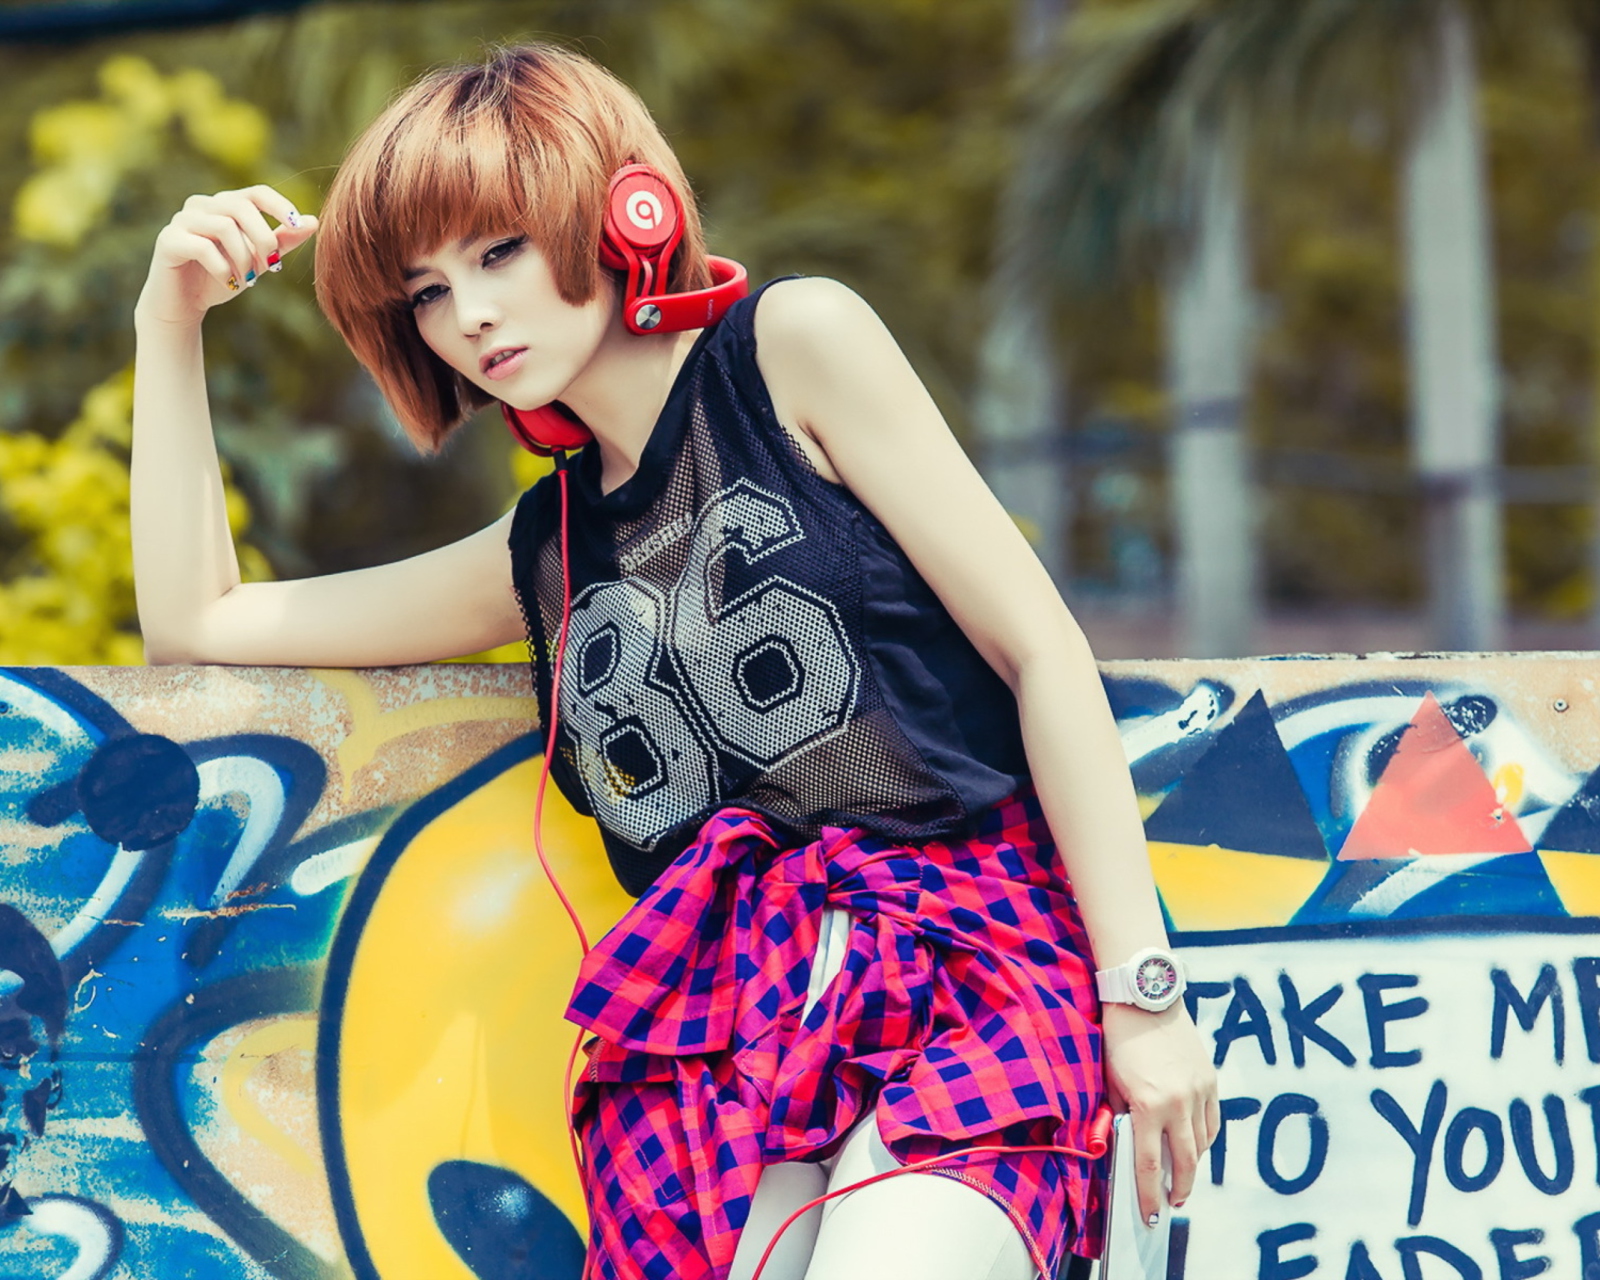 Cool Girl With Red Headphones wallpaper 1600x1280